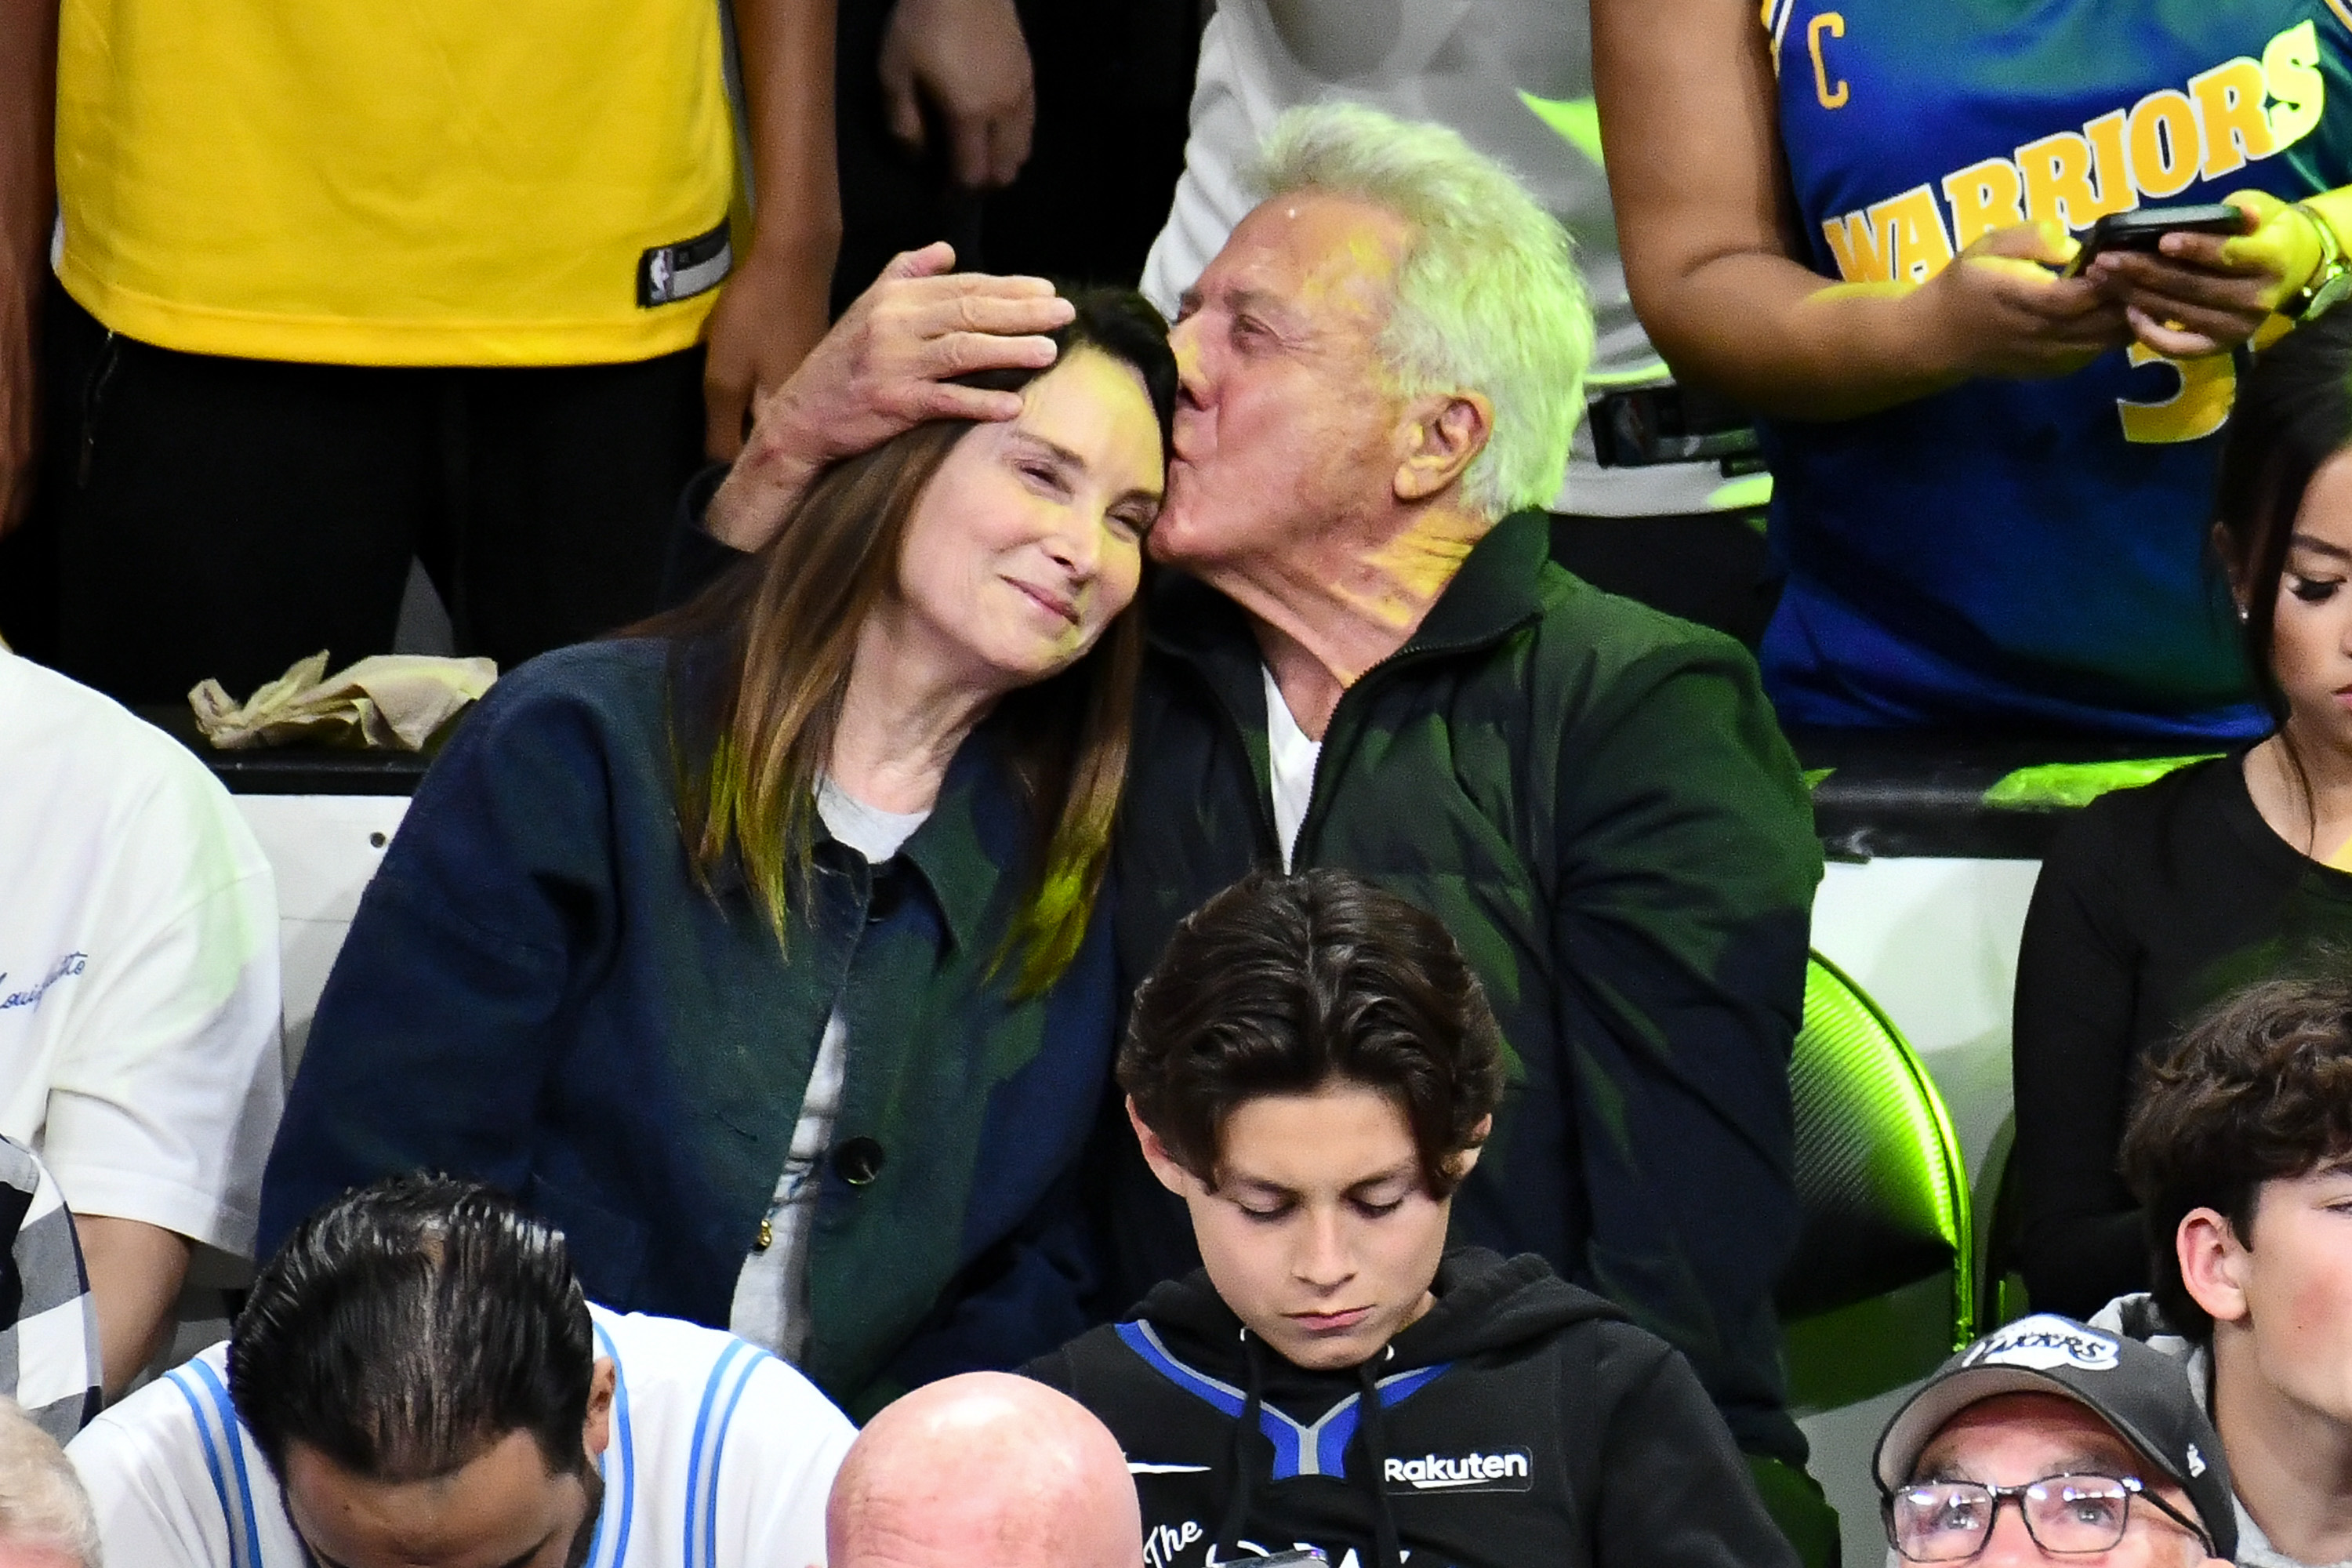 Lisa Hoffman and Dustin Hoffman at a playoff basketball game between the Los Angeles Lakers and the Golden State Warriors in Los Angeles, California on May 8, 2023. | Source: Getty Images